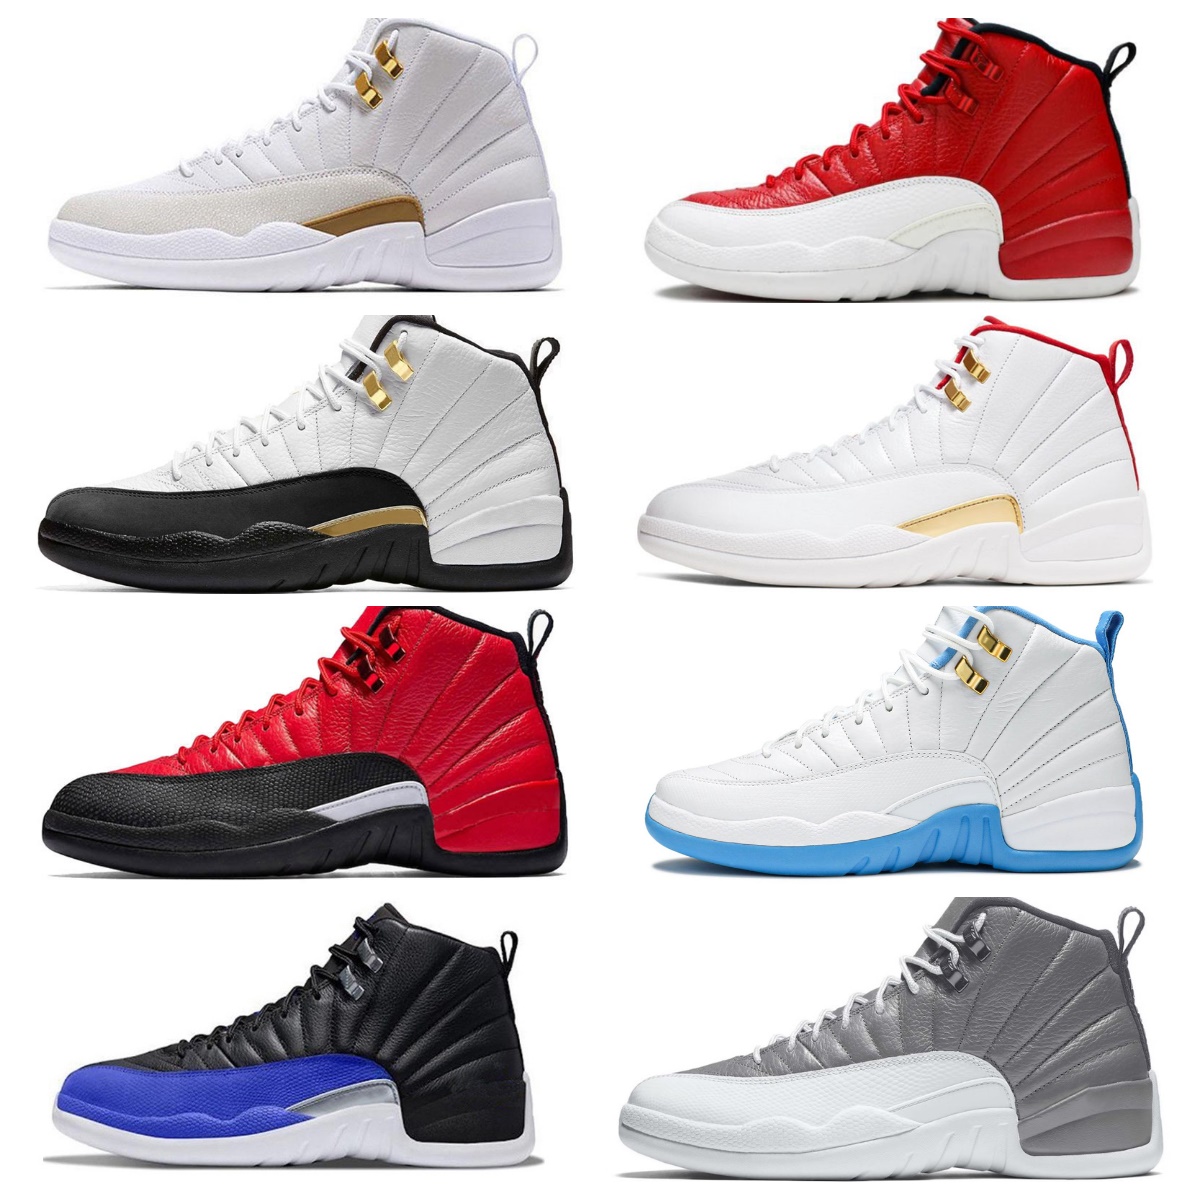 

Jumpman 12 Mens Basketball Shoes 12s Playoffs Royalty Taxi Stealth Reverse Flu Game Hyper Royal Twist Utility Dark Concord University Blue Trainers Sports Sneakers, Bubble package bag